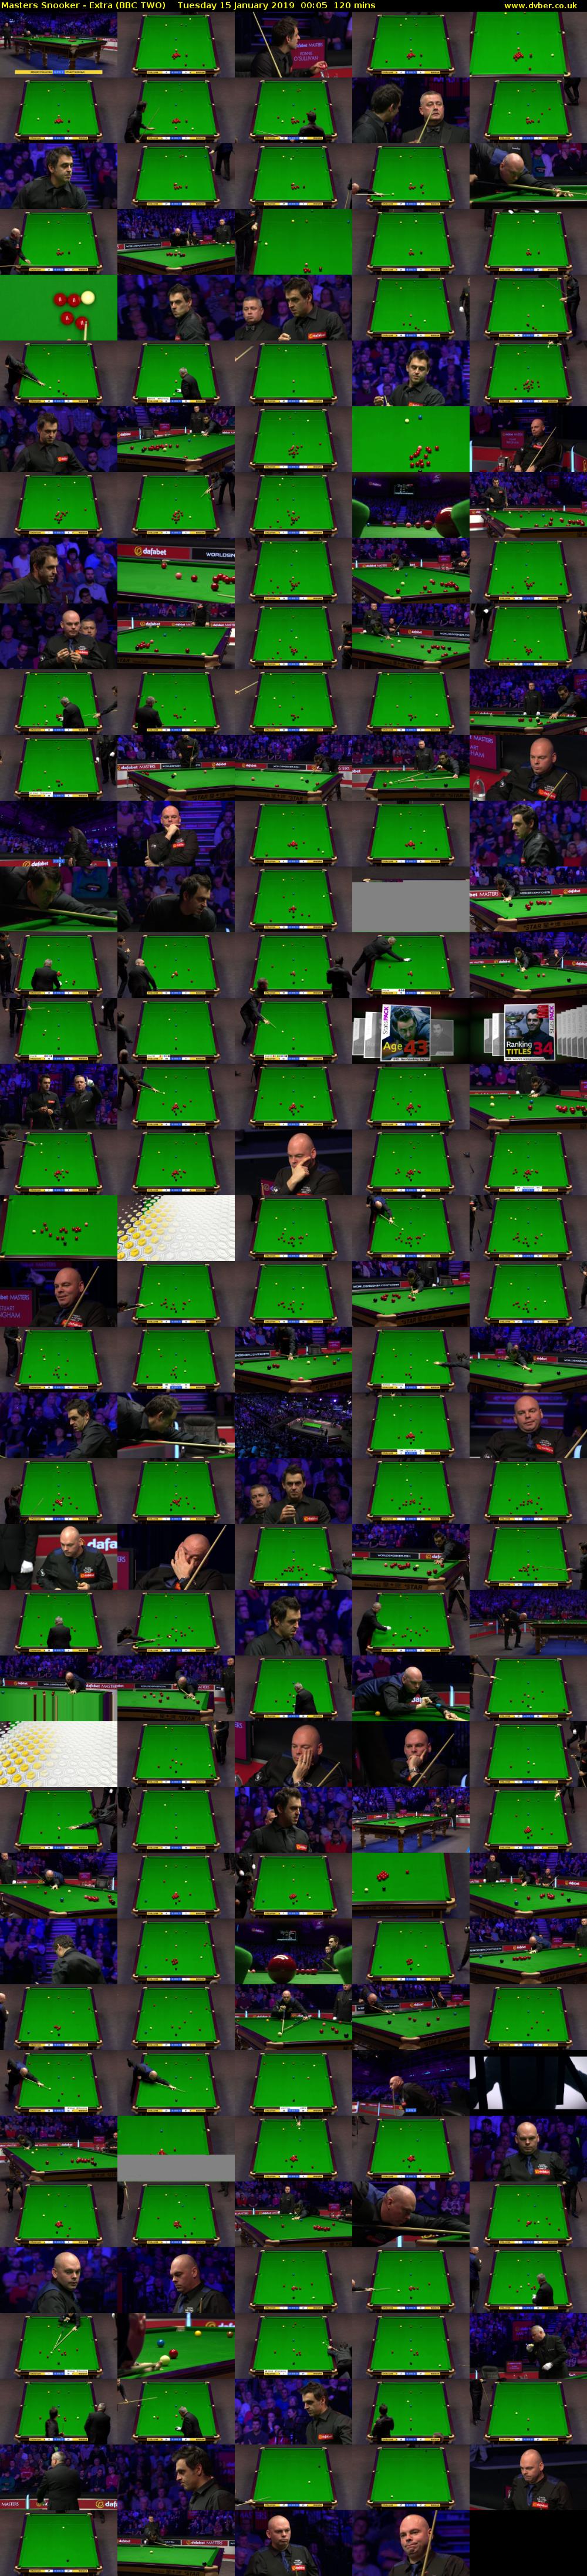 Masters Snooker - Extra (BBC TWO) Tuesday 15 January 2019 00:05 - 02:05